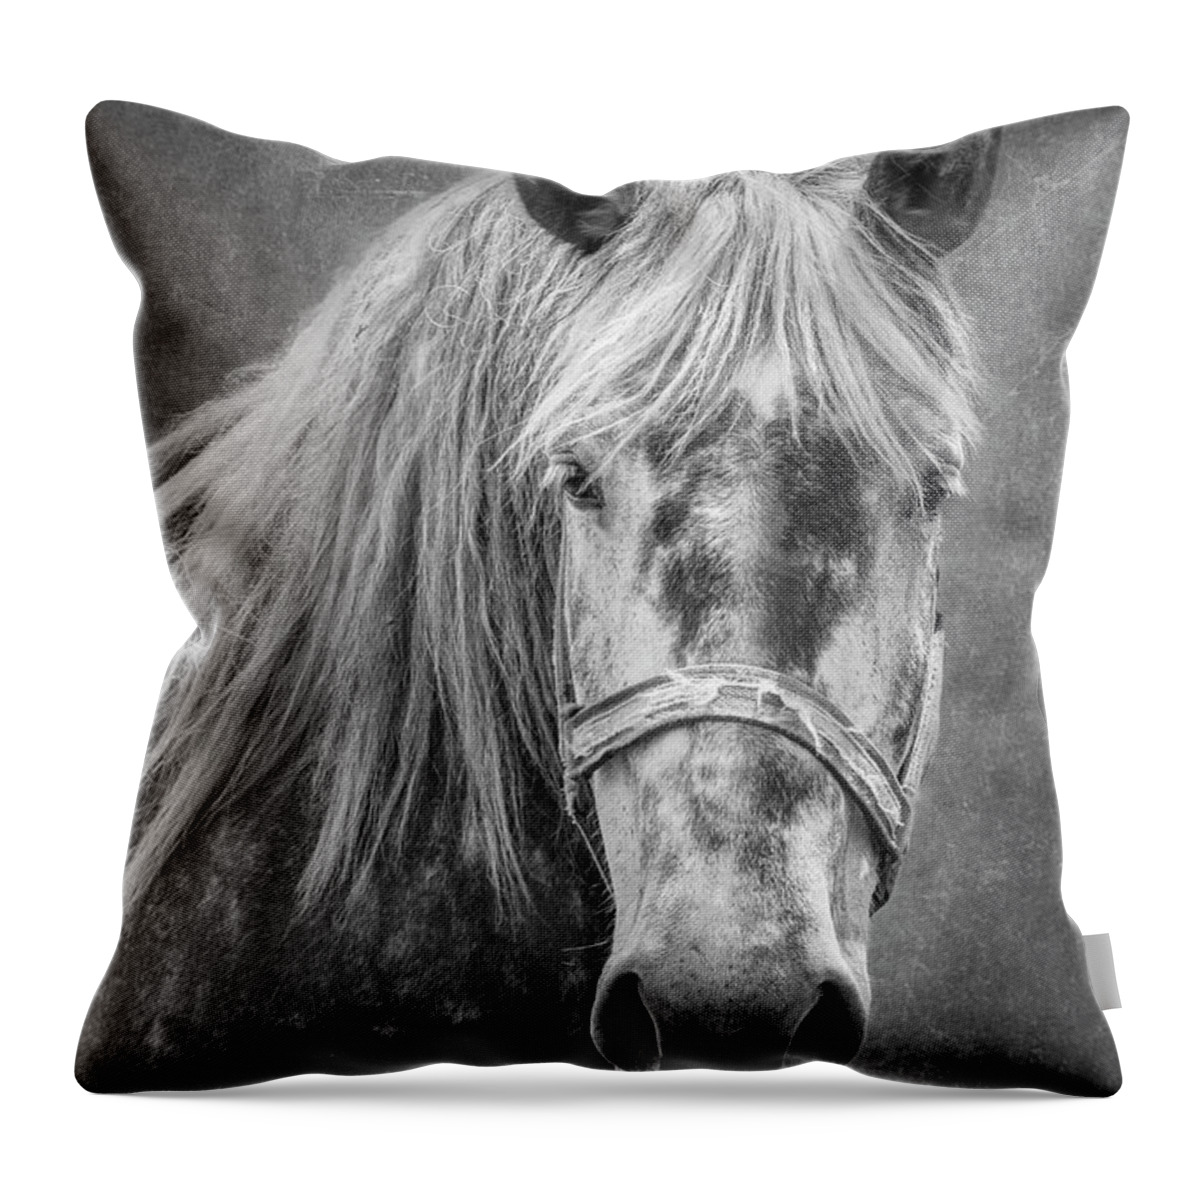 Animal Throw Pillow featuring the photograph Portrait of a Horse by Tom Mc Nemar